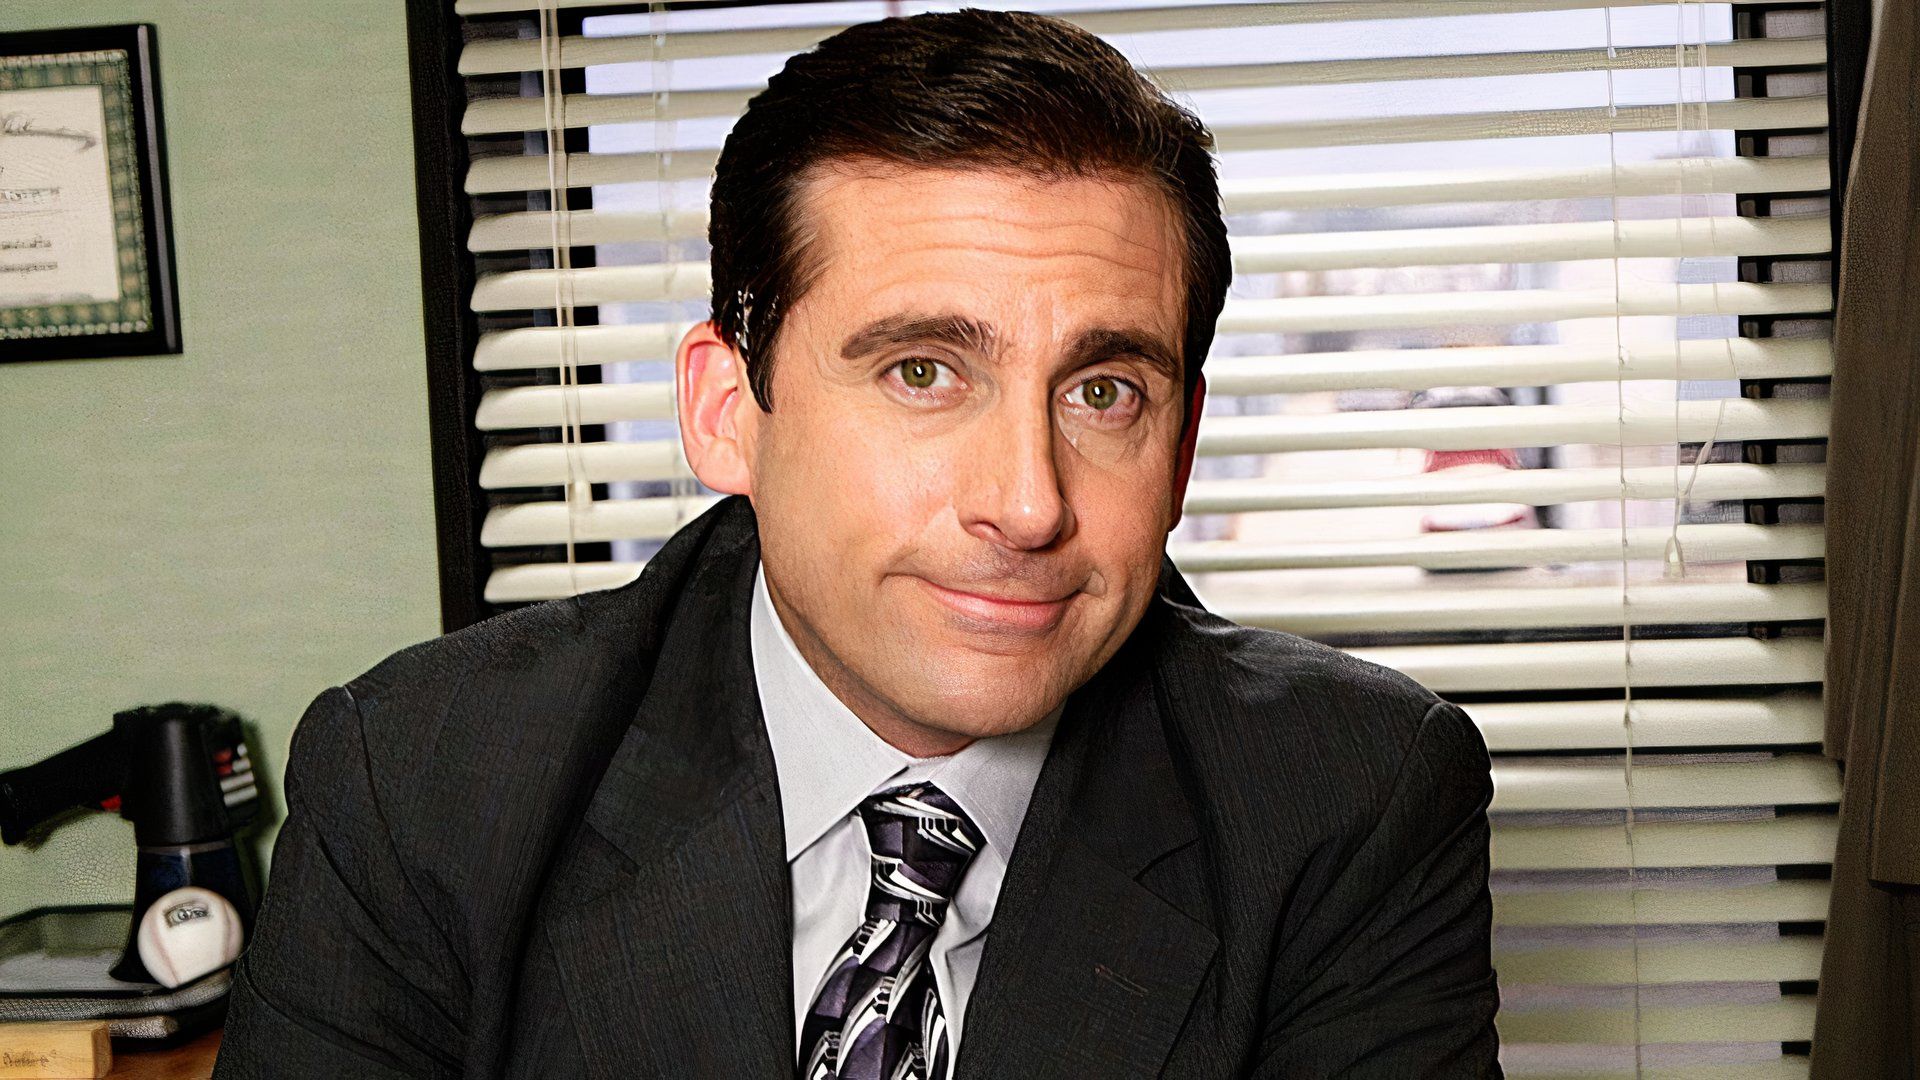 Steve Carrell in The Office.